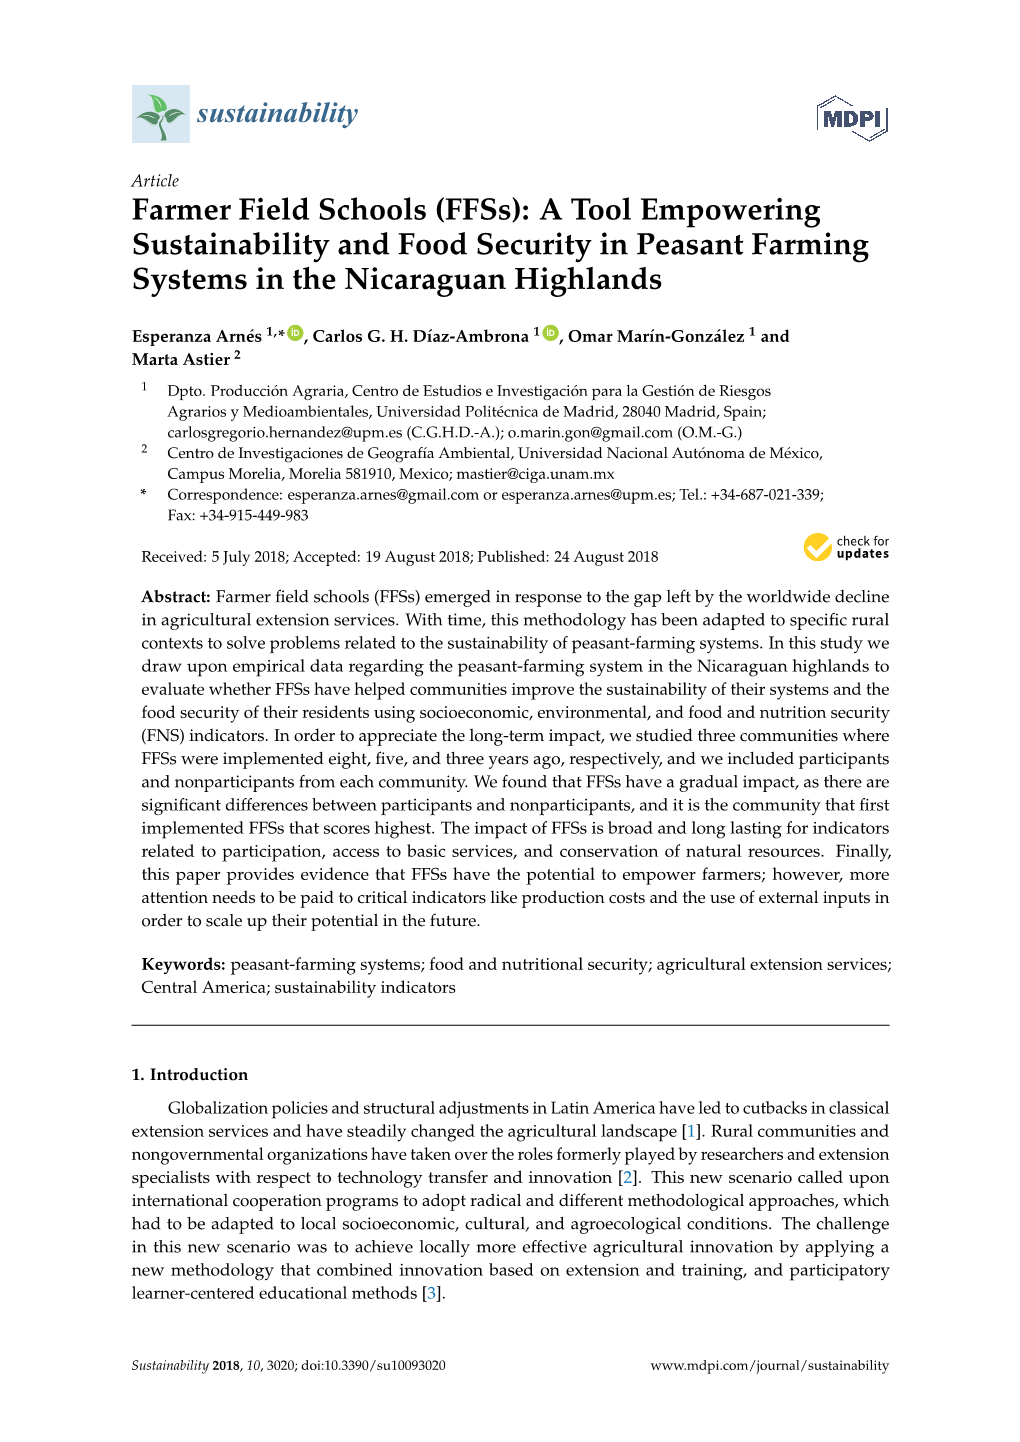 Farmer Field Schools (Ffss): a Tool Empowering Sustainability and Food Security in Peasant Farming Systems in the Nicaraguan Highlands